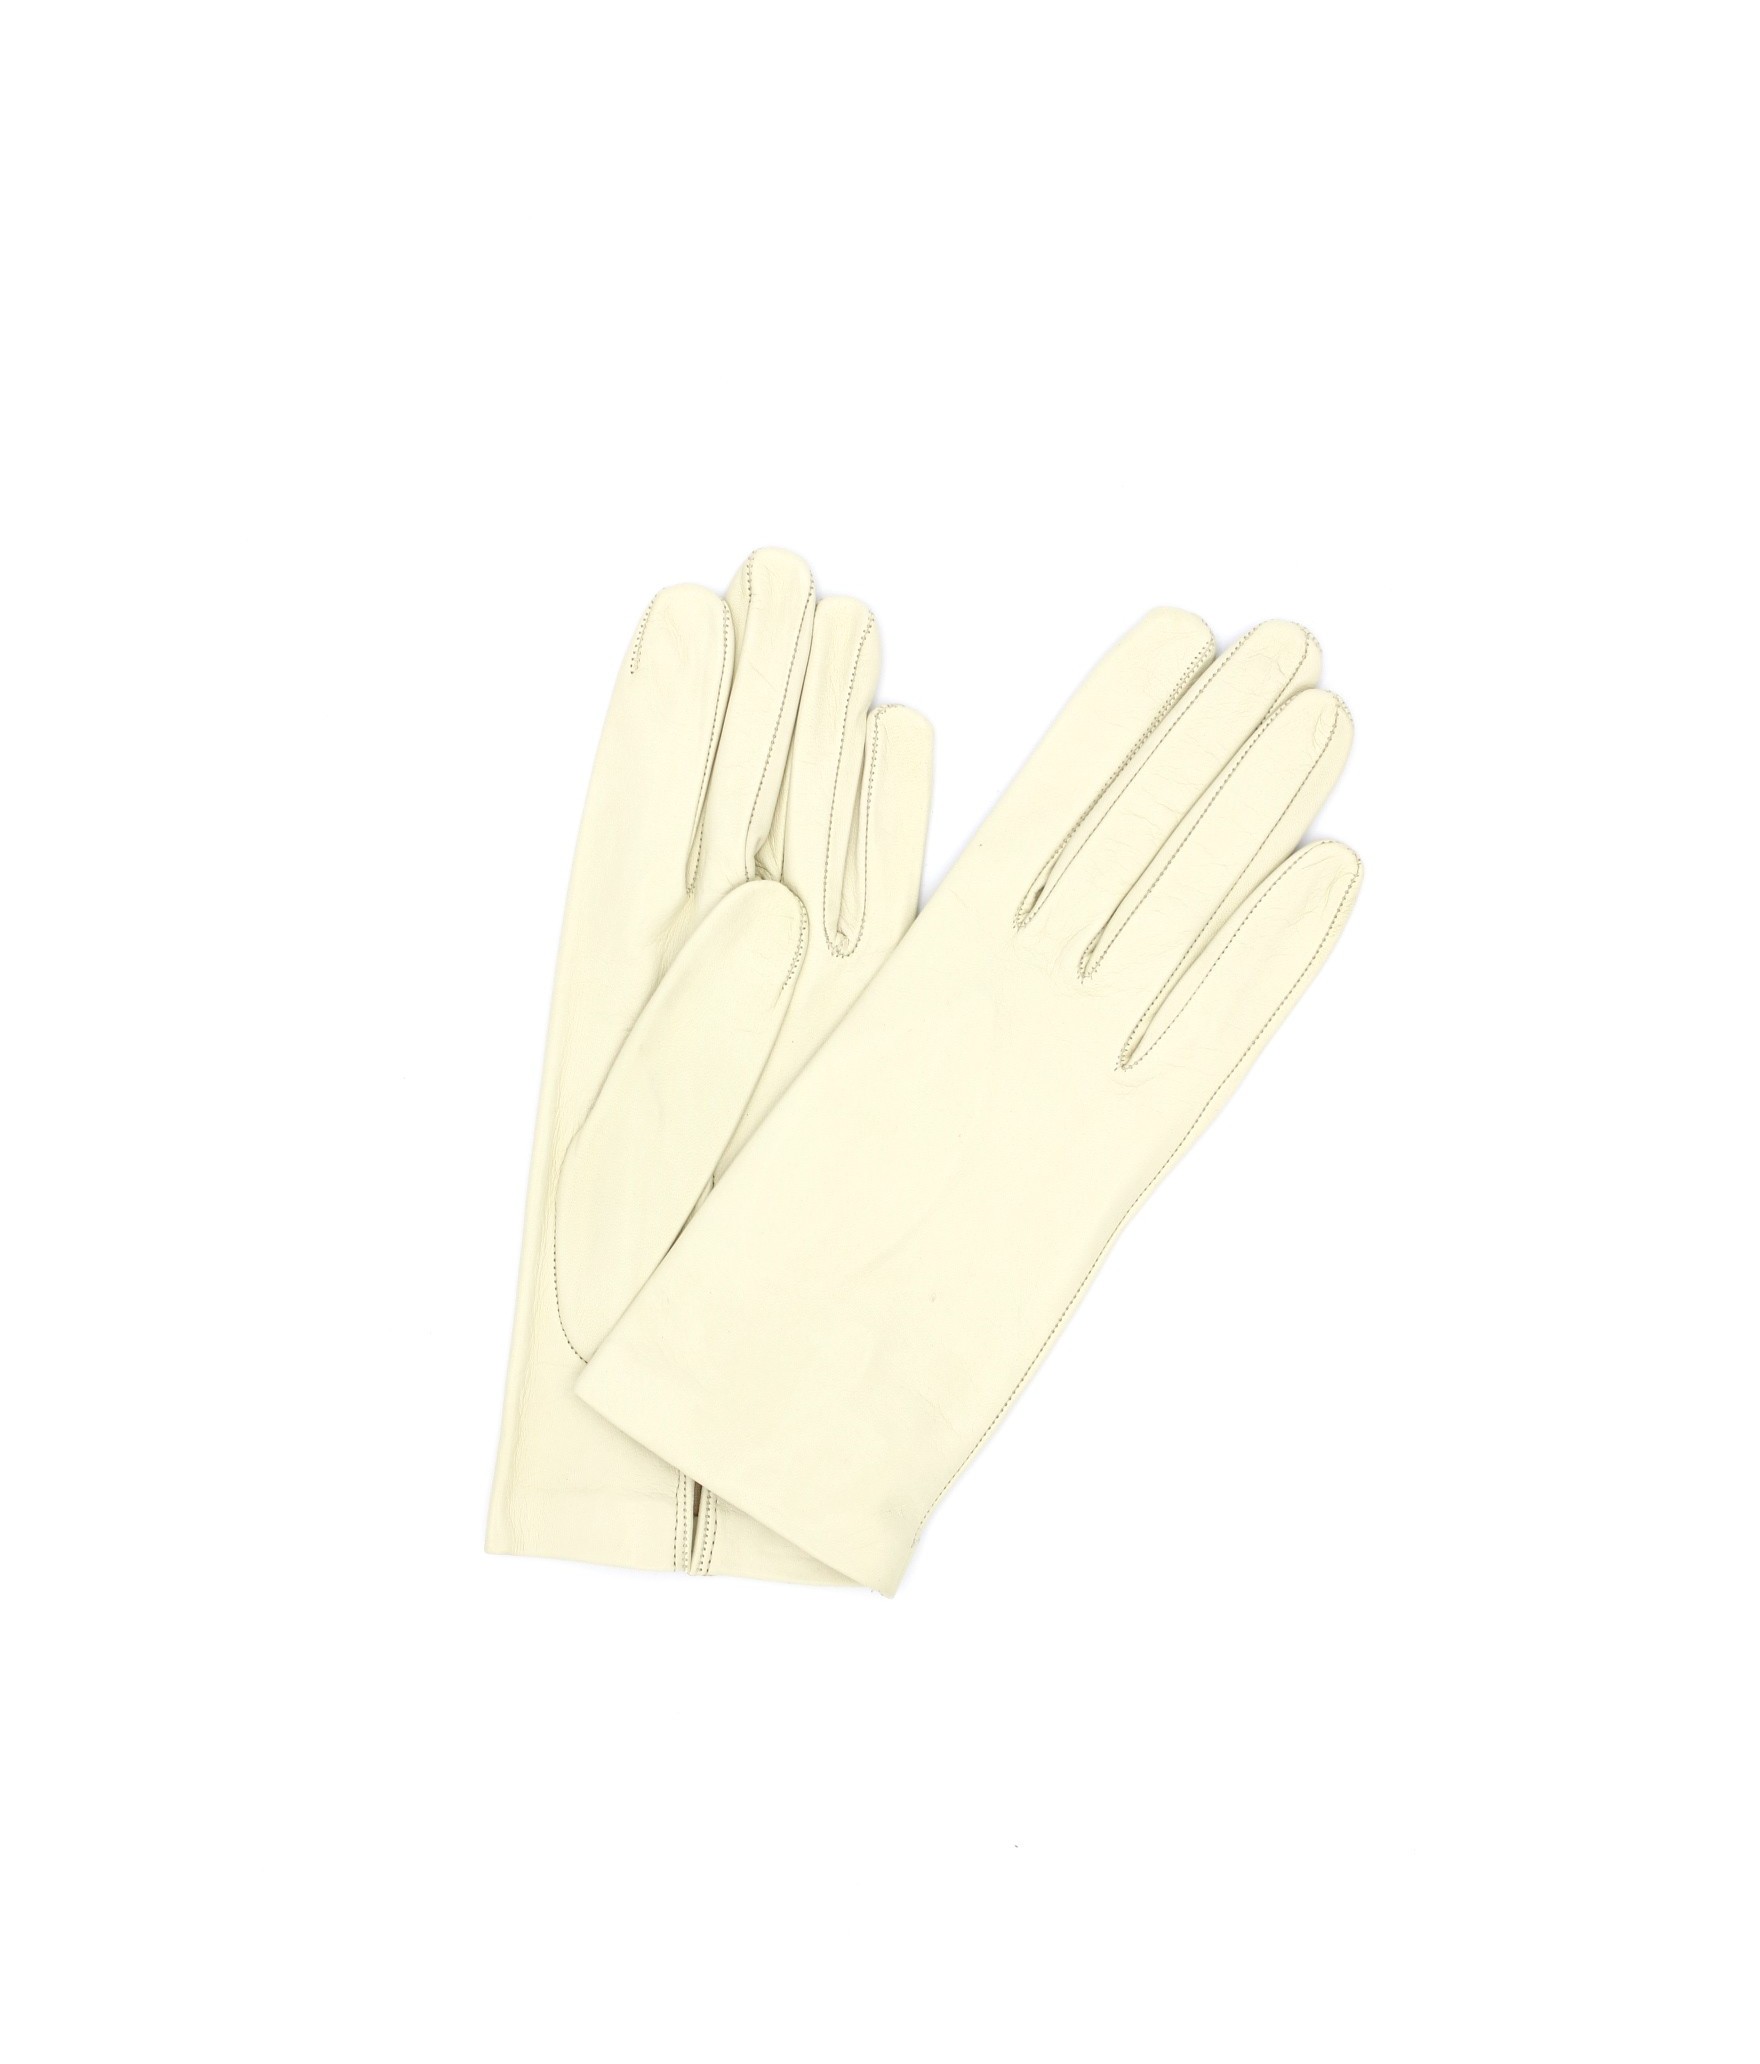 1002 Classic Kid Leather Gloves Silk Lined Cream 